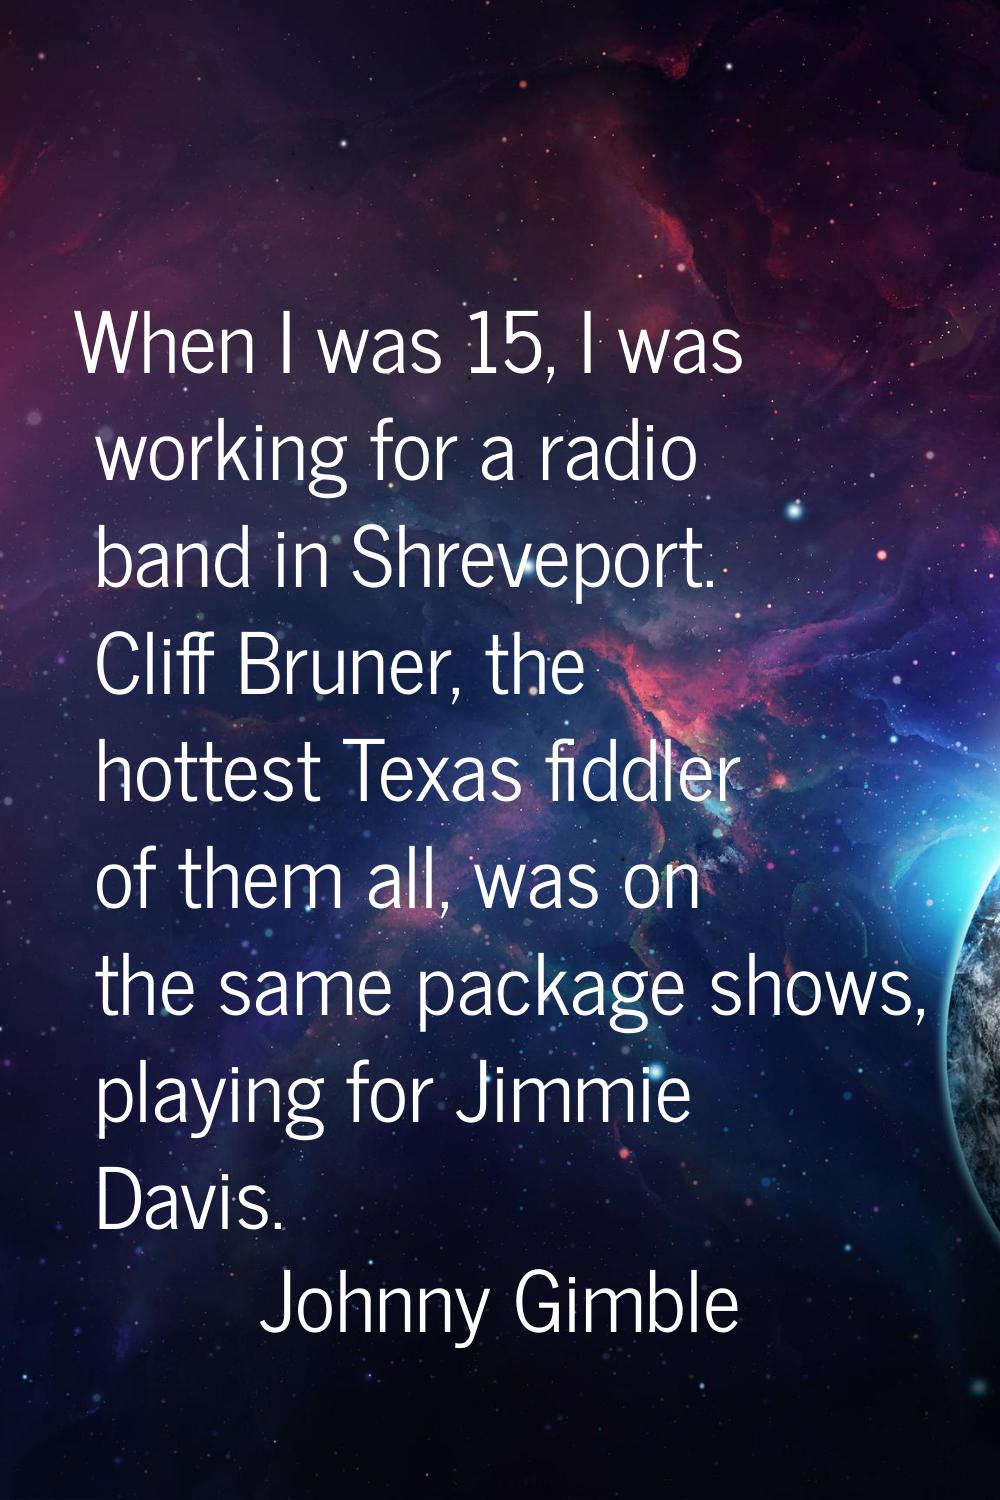 When I was 15, I was working for a radio band in Shreveport. Cliff Bruner, the hottest Texas fiddle